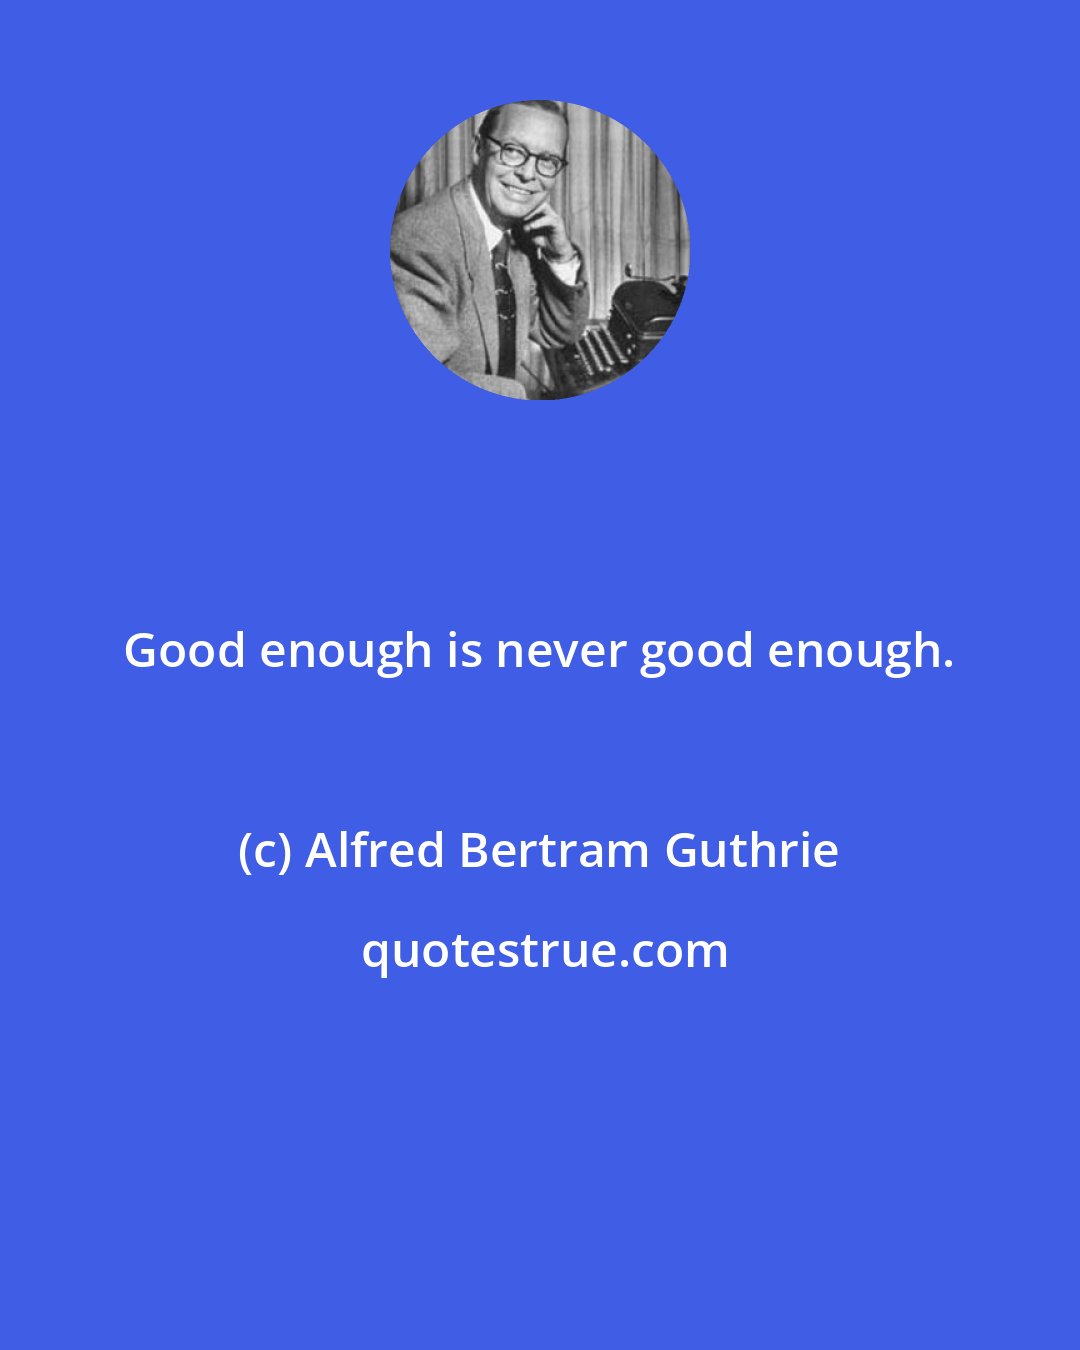 Alfred Bertram Guthrie: Good enough is never good enough.